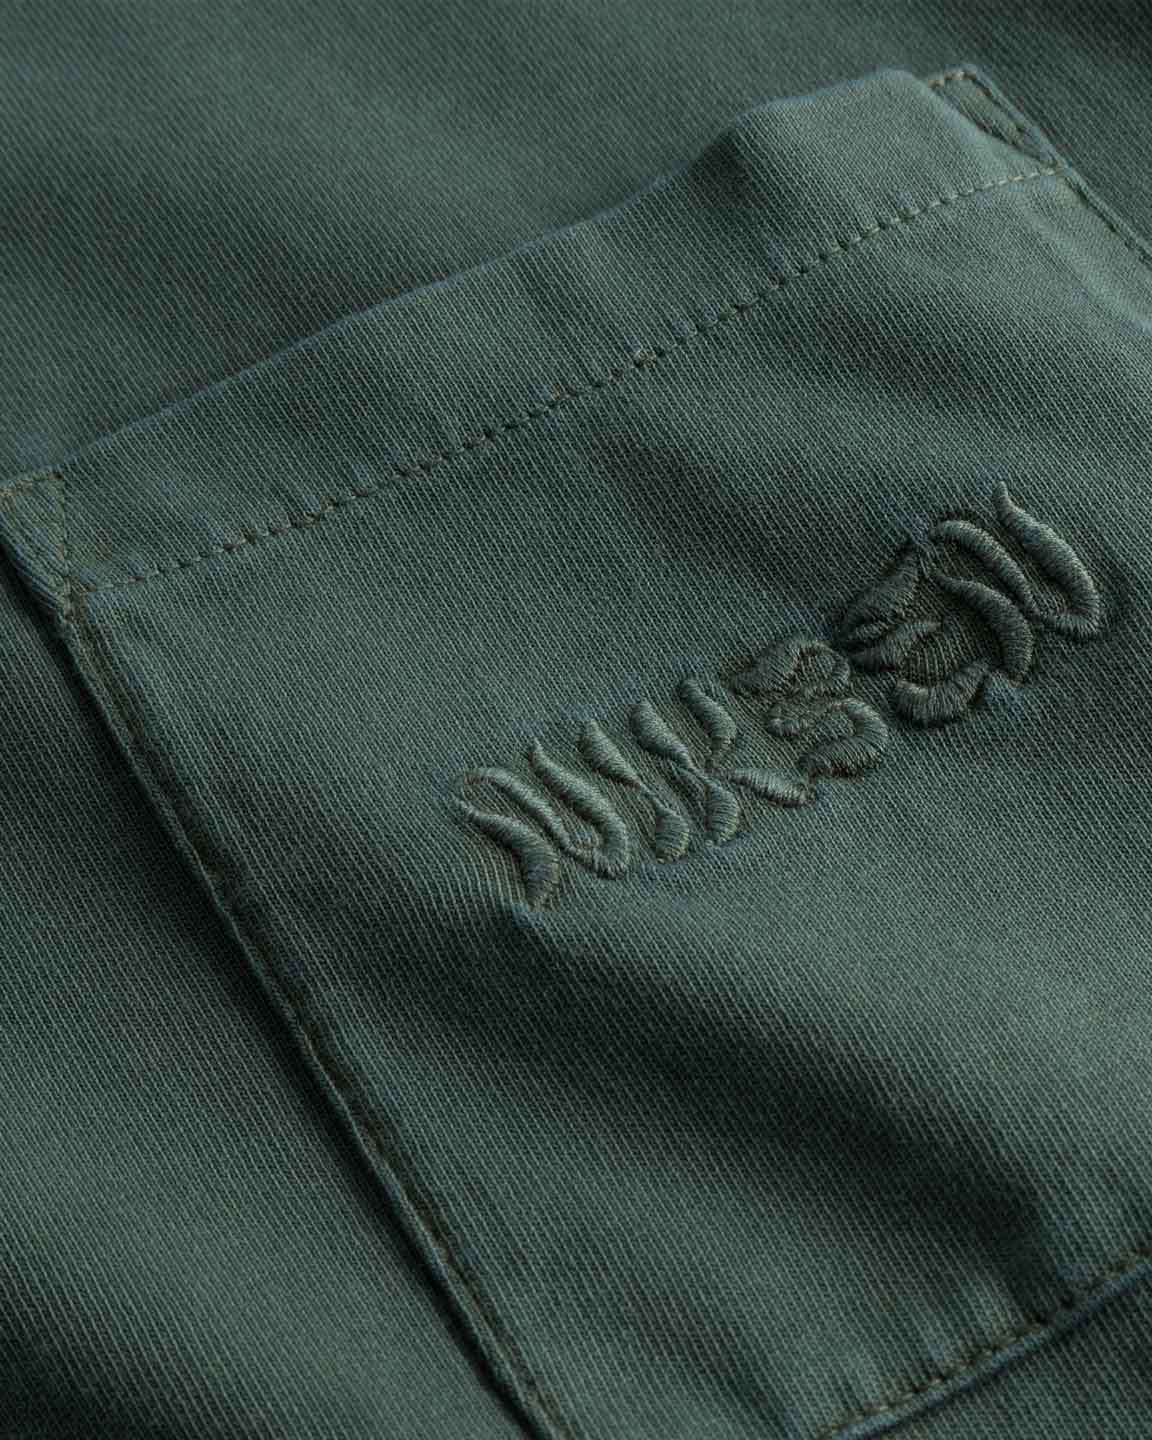 Close up of chest pocket with tone in tone embroidered logo on washed green t-shirt.